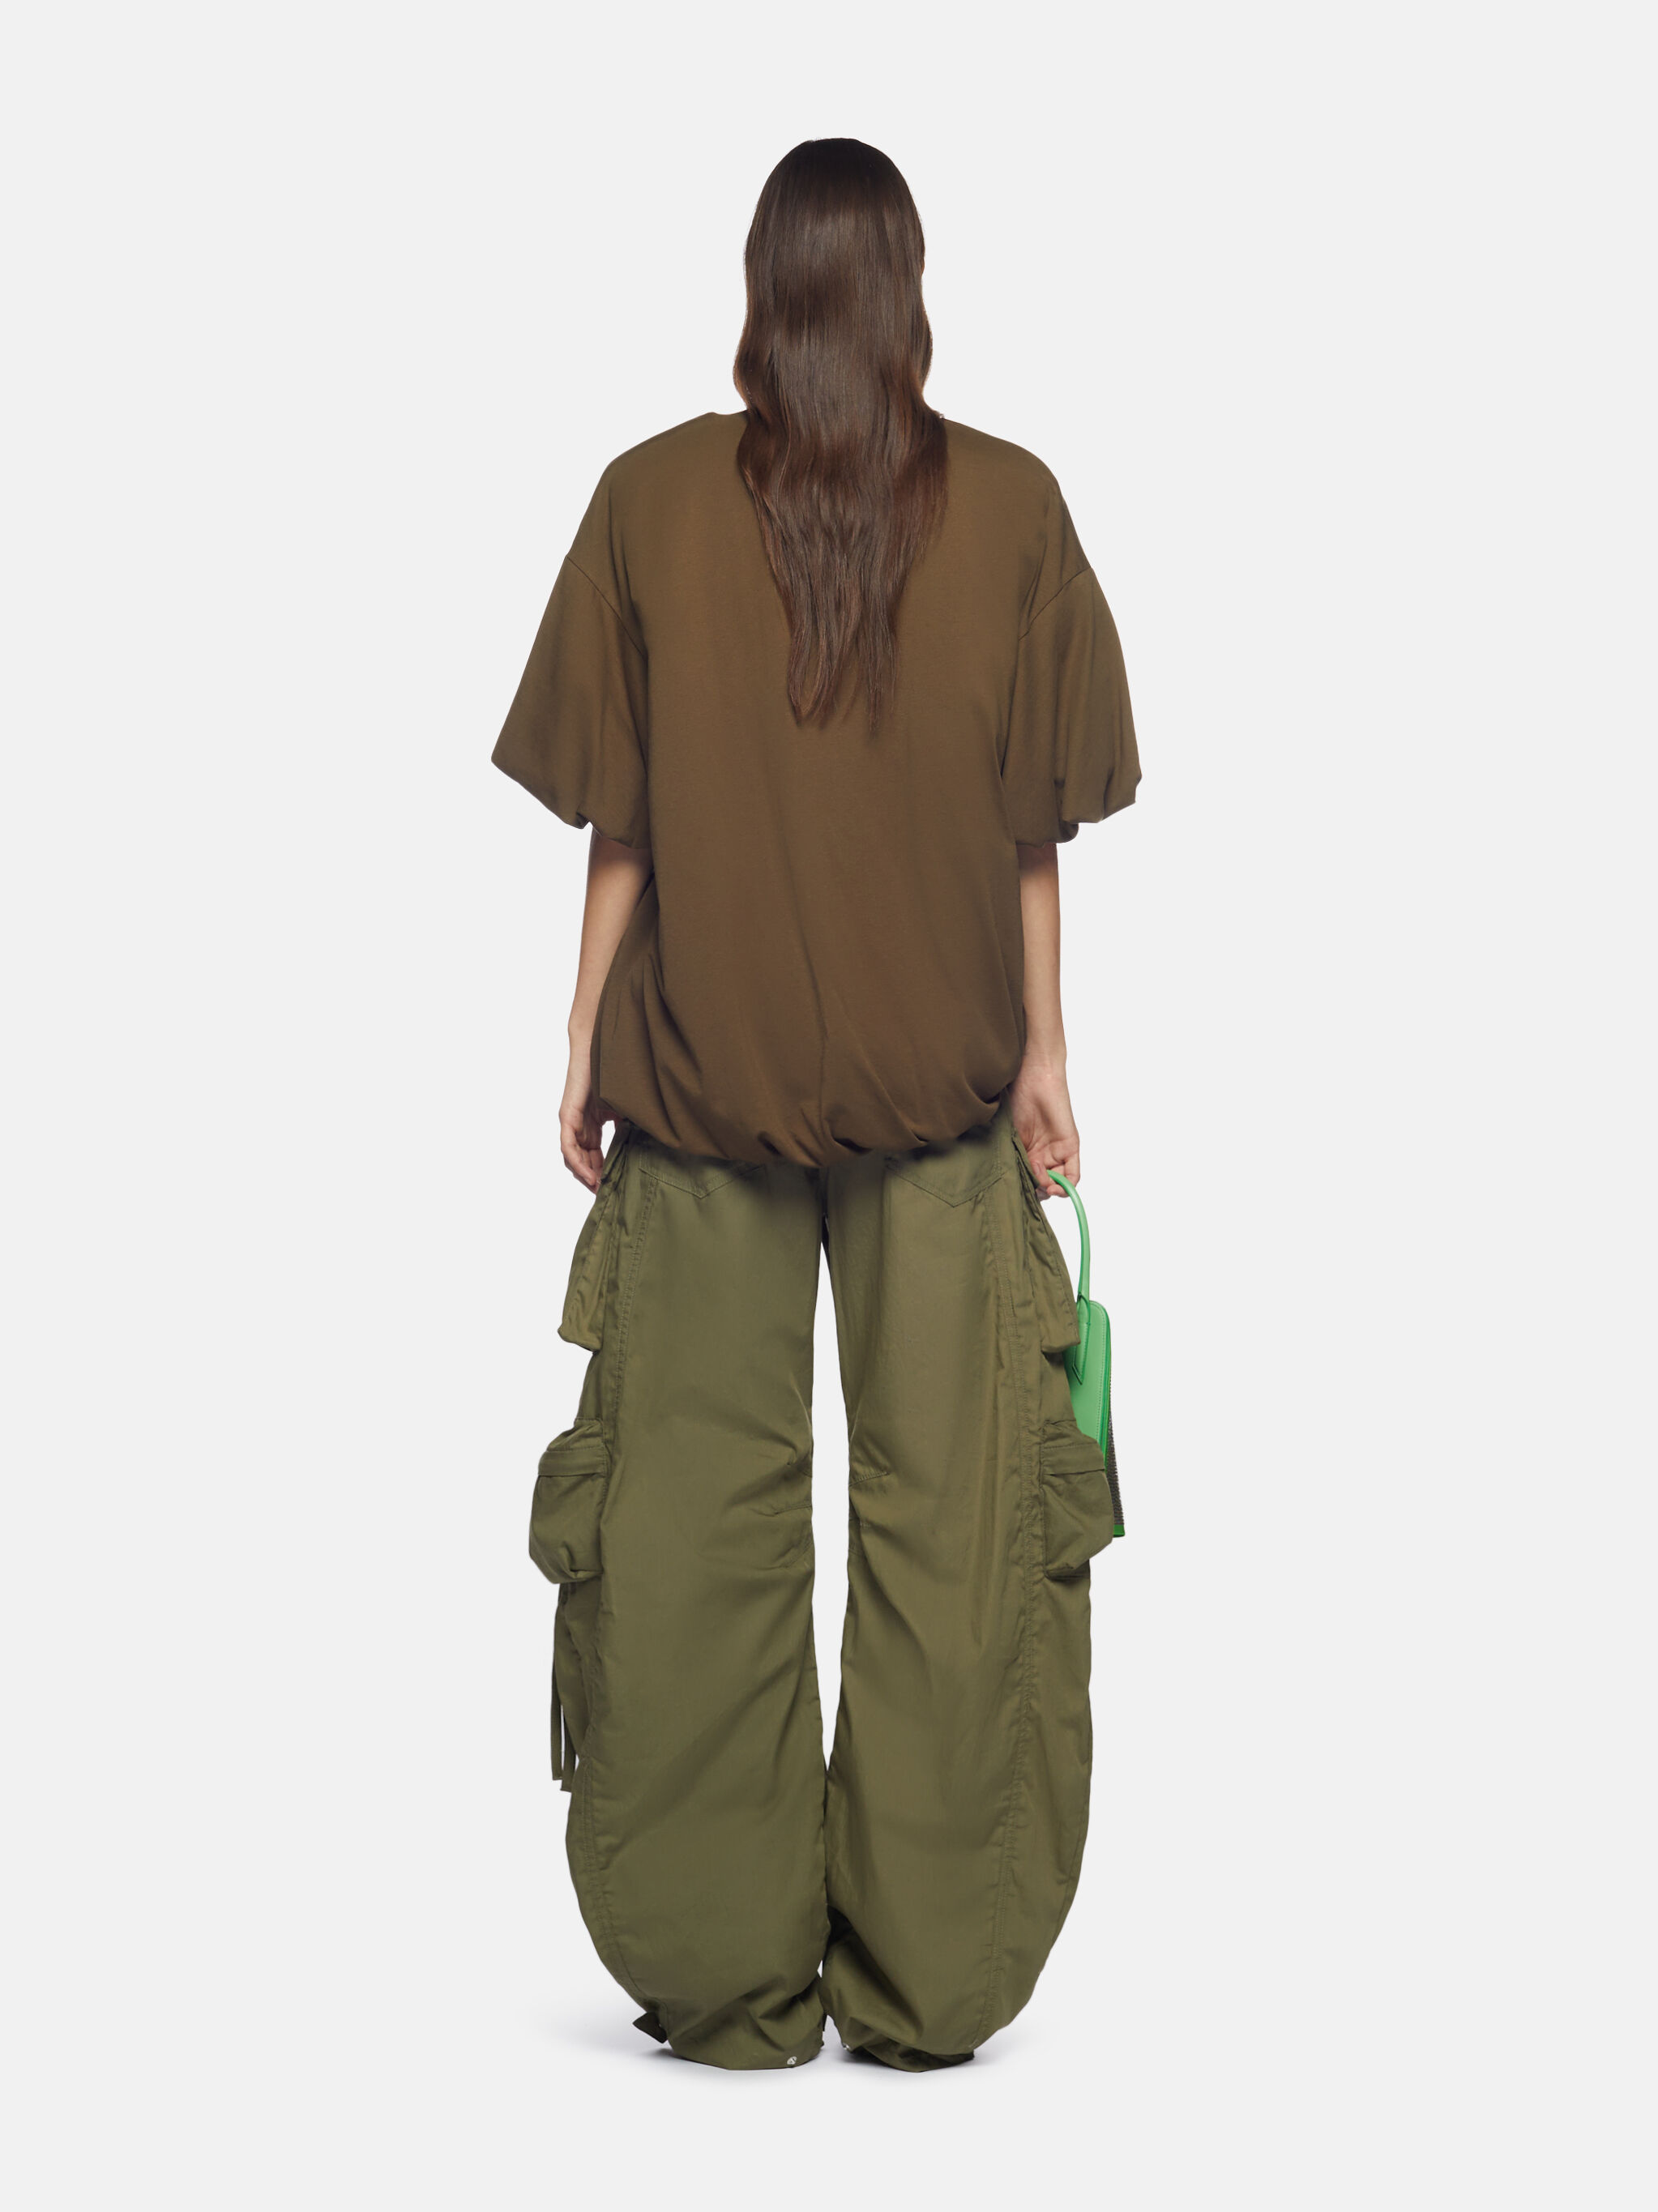 Vintage British Army Pants - Utility Workwear Trousers Green 80s 90s - All  Sizes | eBay